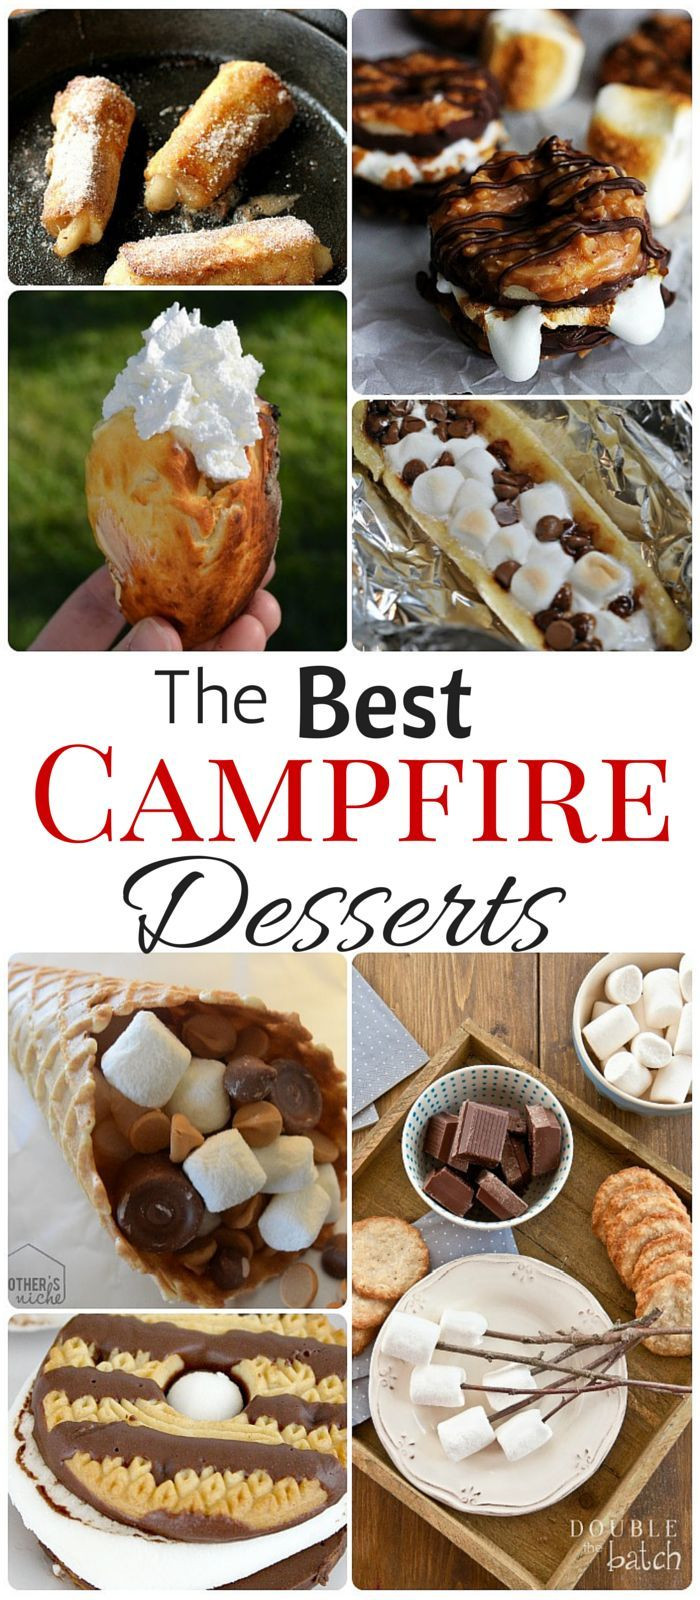 Best Camping Desserts
 17 Best ideas about Camping Desserts on Pinterest